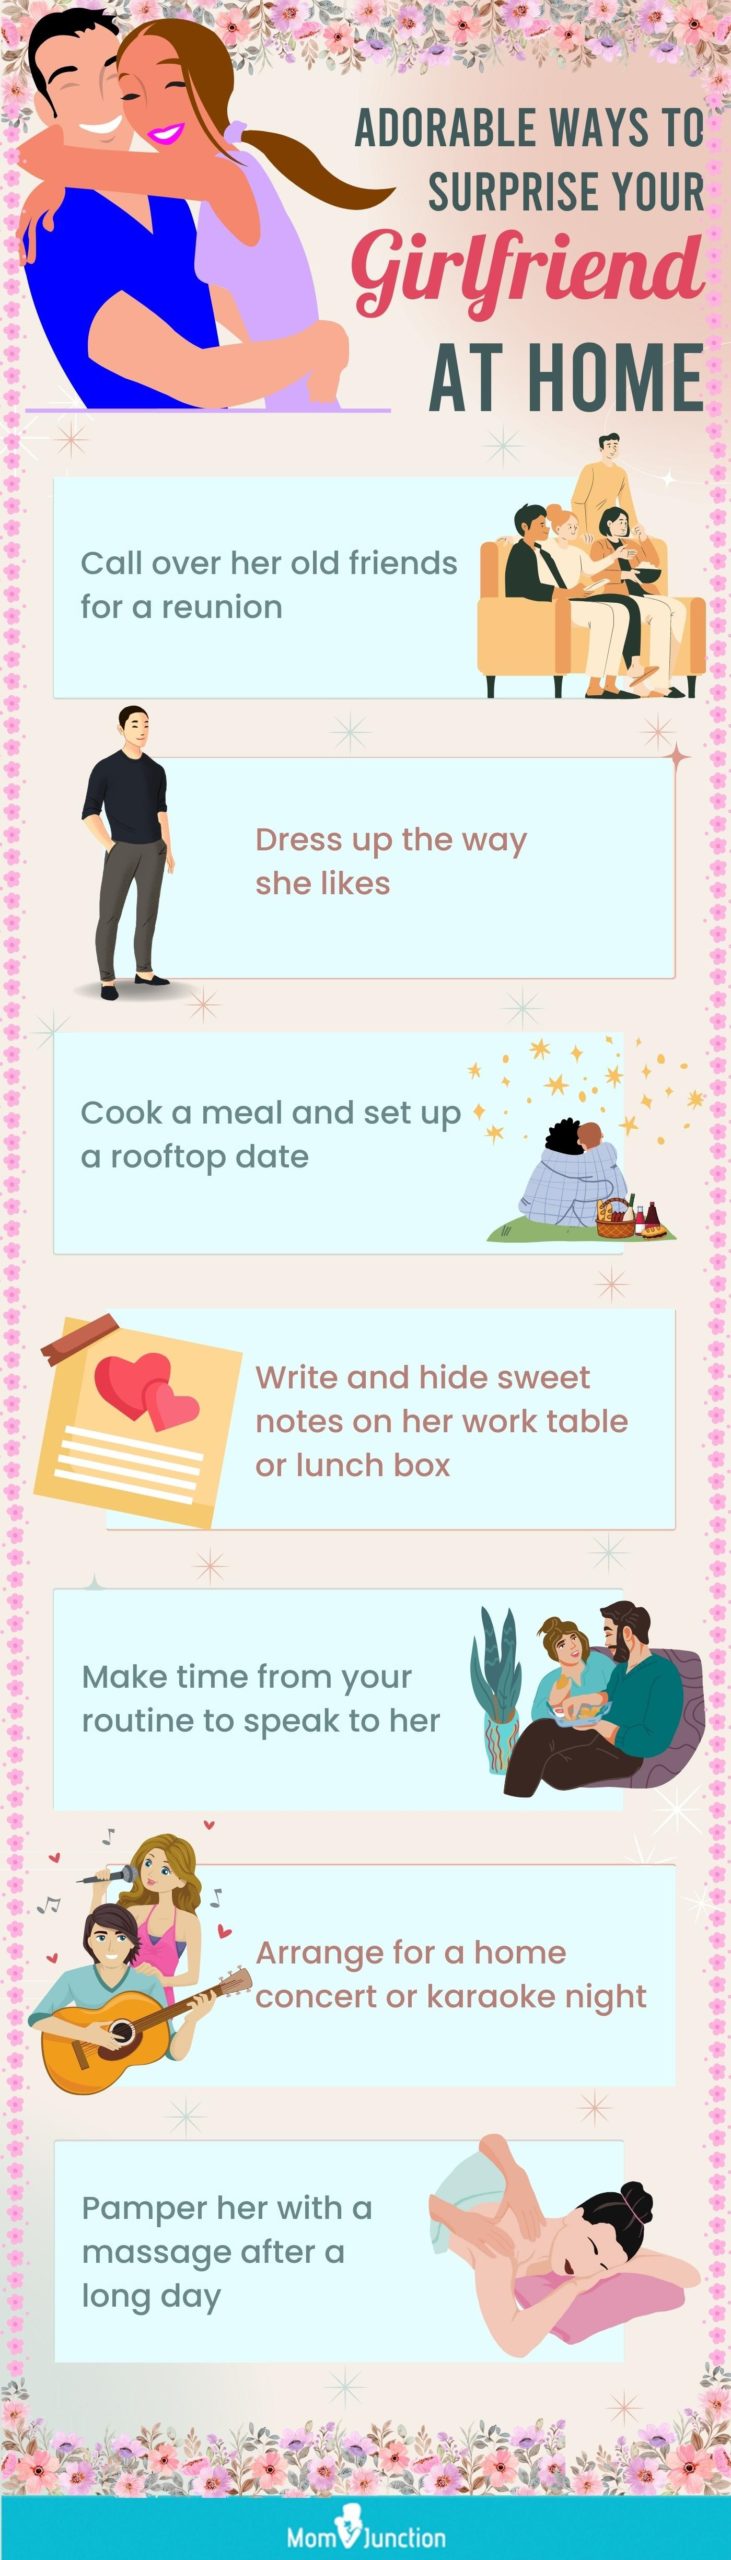 ways to surprise your girlfriend (infographic)